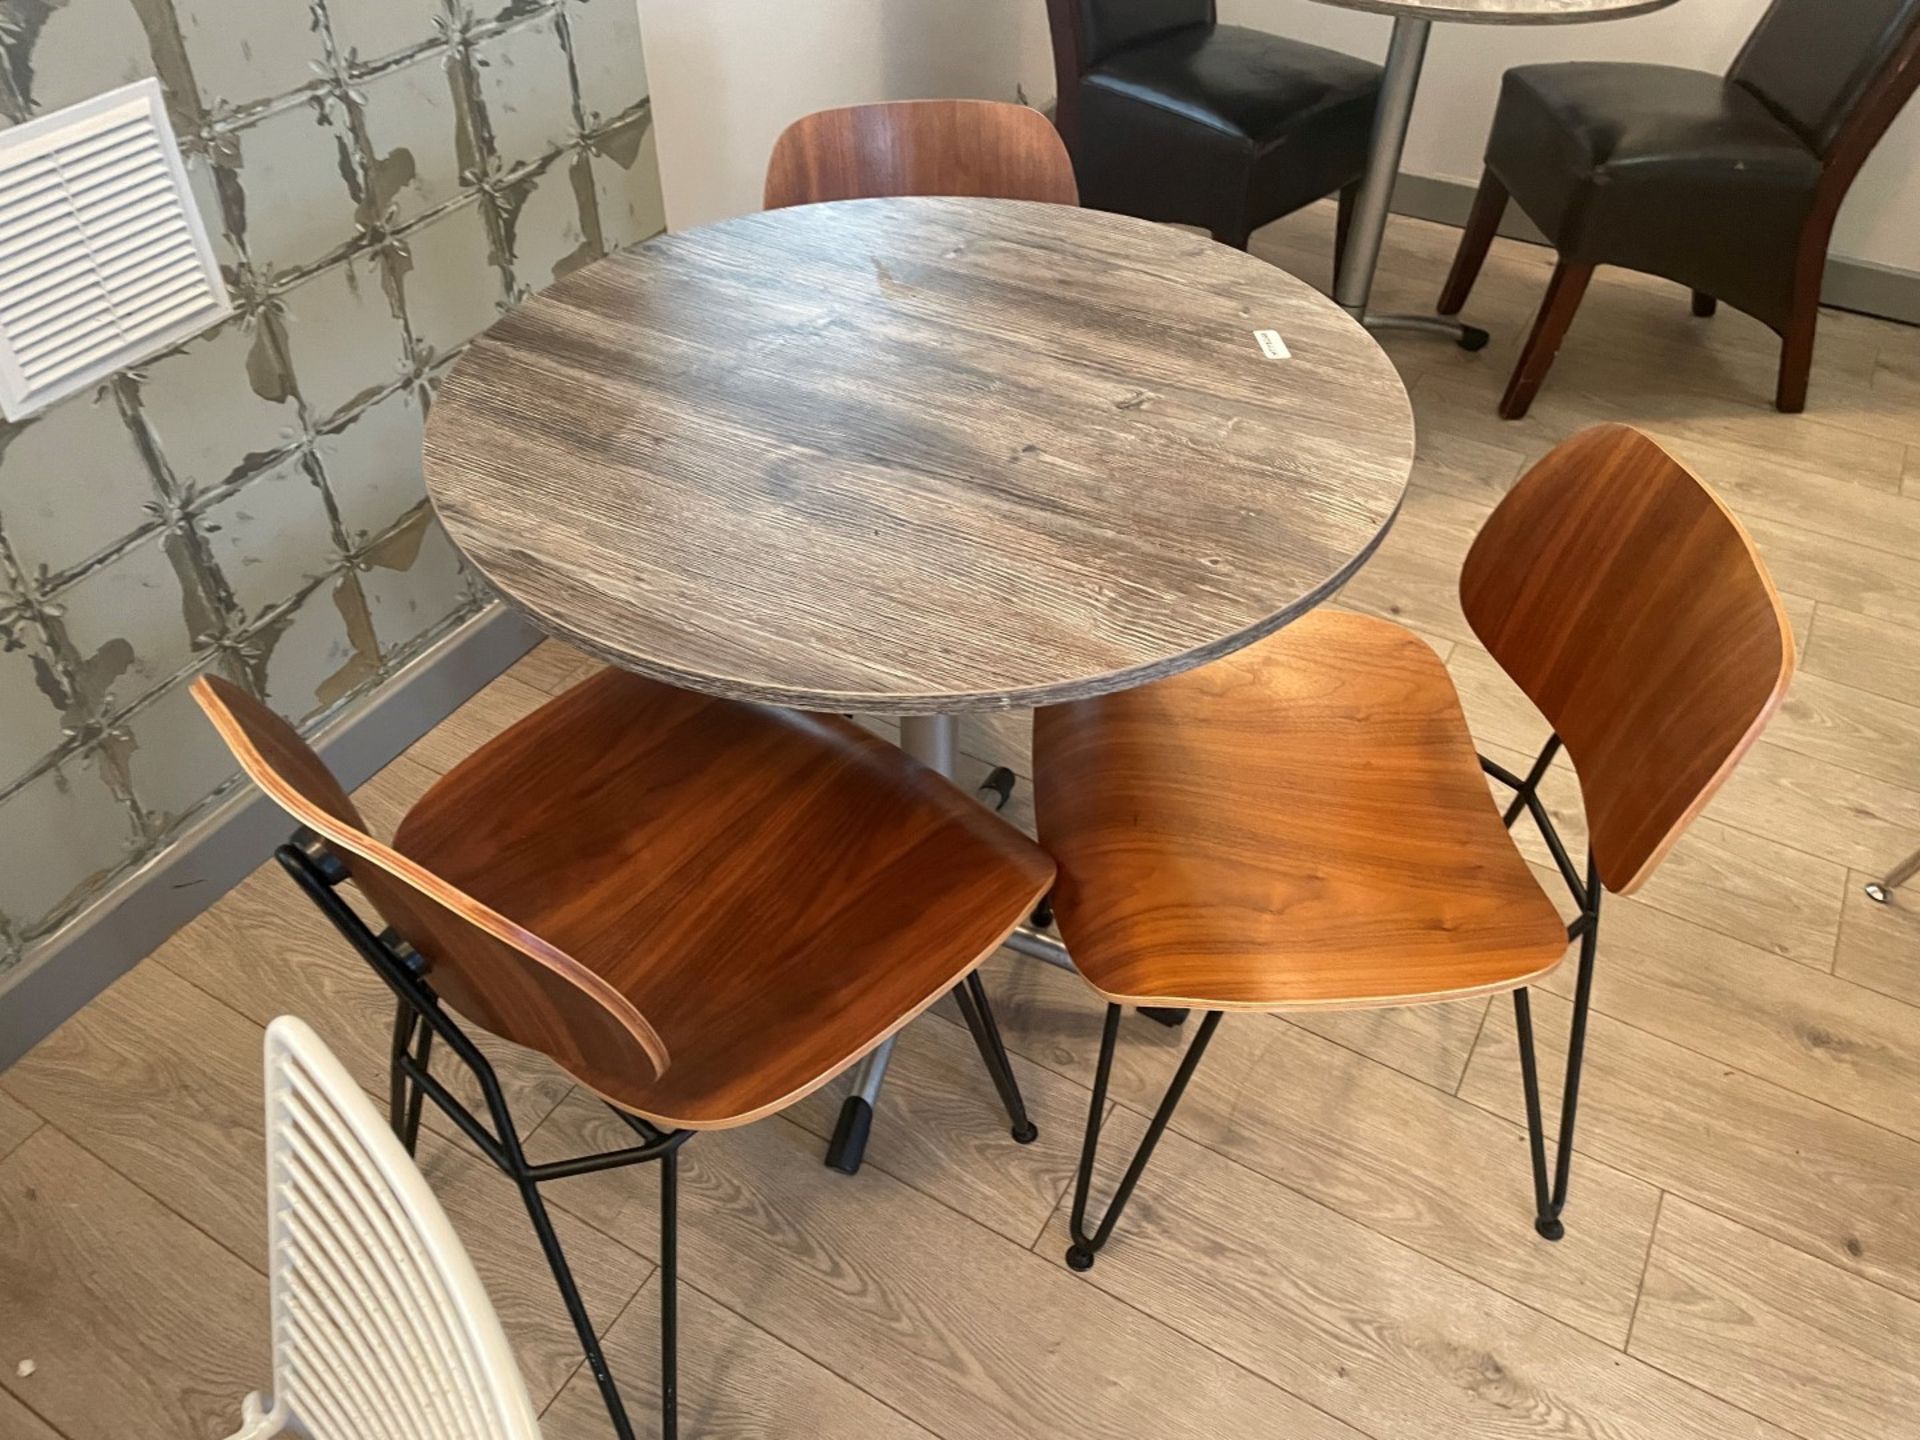 1 x Round 80cm Wooden Driftwood Table With Chrome Base and Three Contemporary Chairs - Ref: - Image 5 of 5